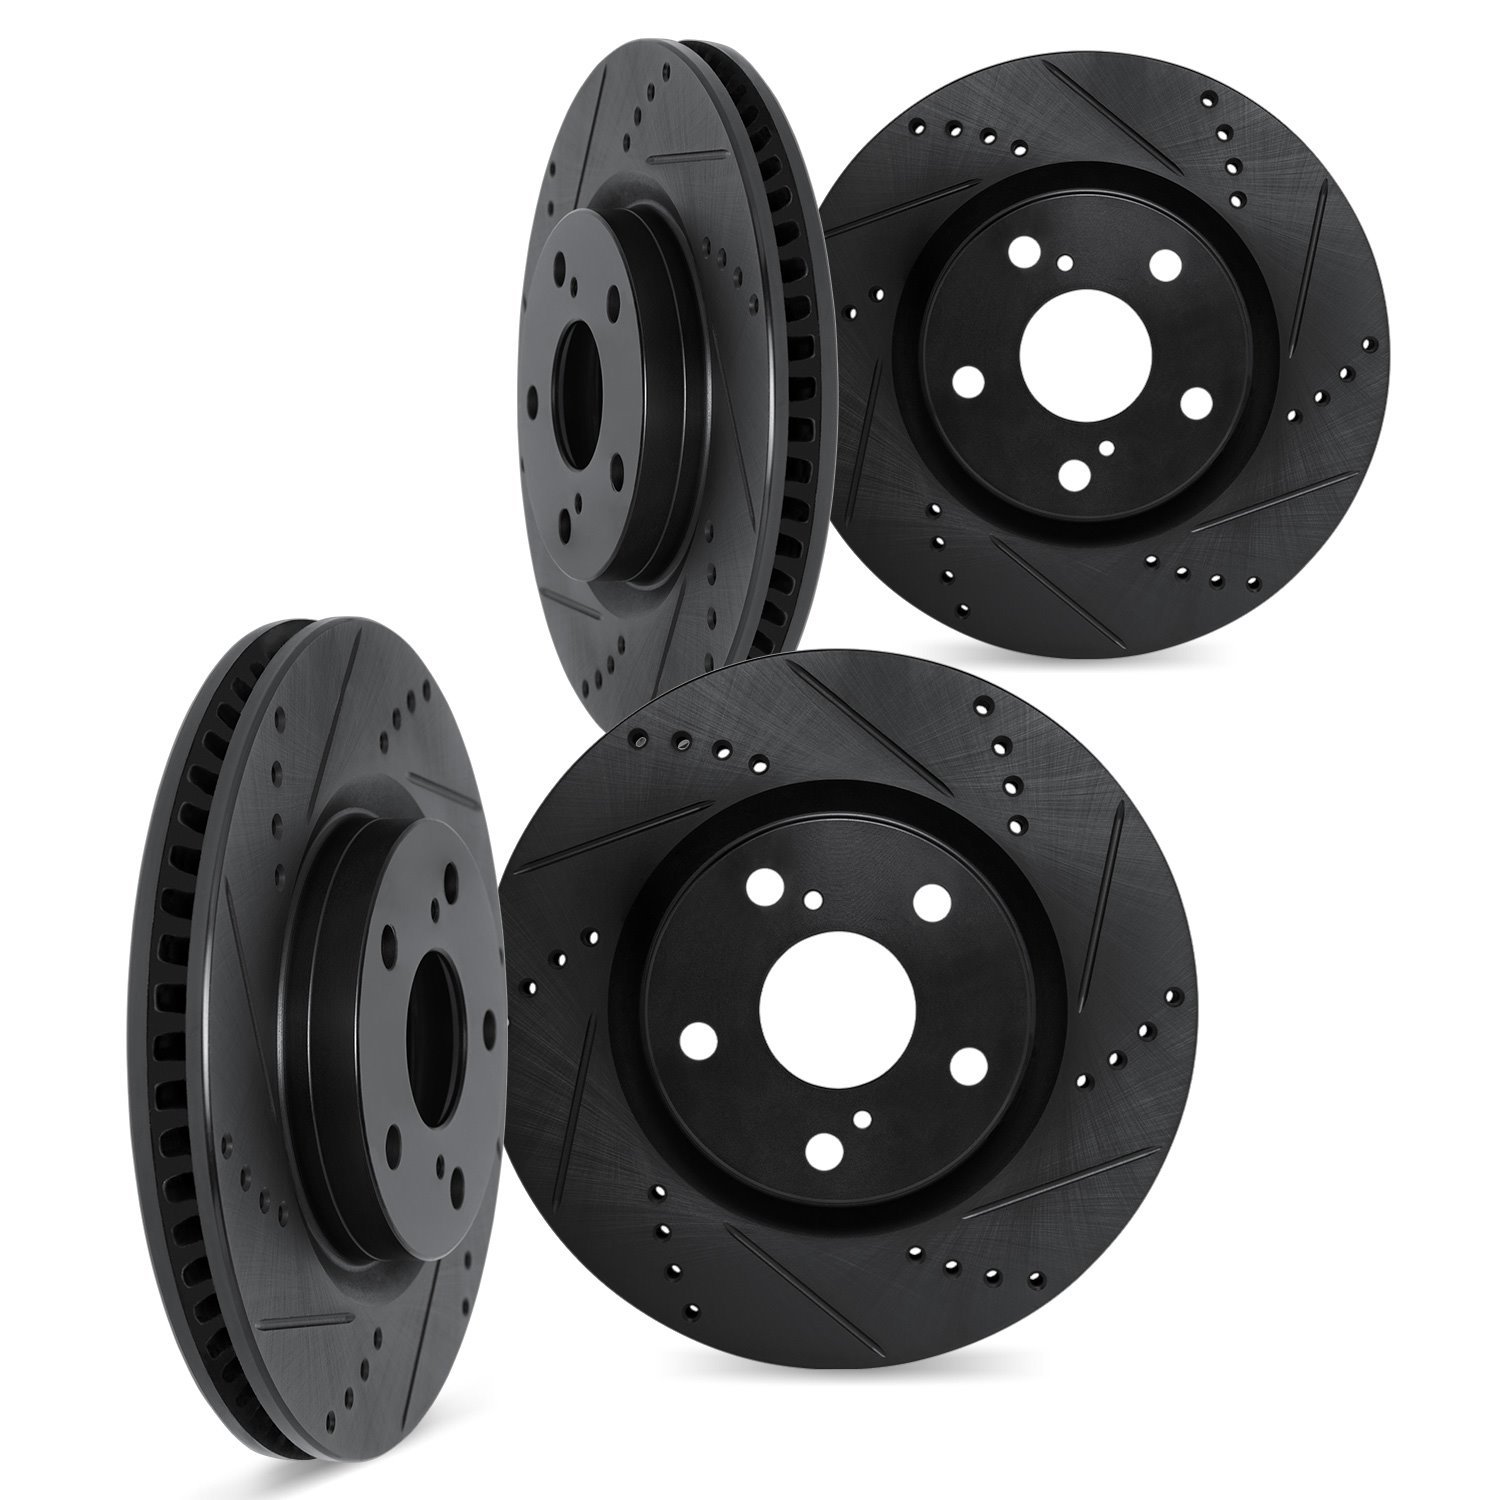 8004-31048 Drilled/Slotted Brake Rotors [Black], Fits Select BMW, Position: Front and Rear